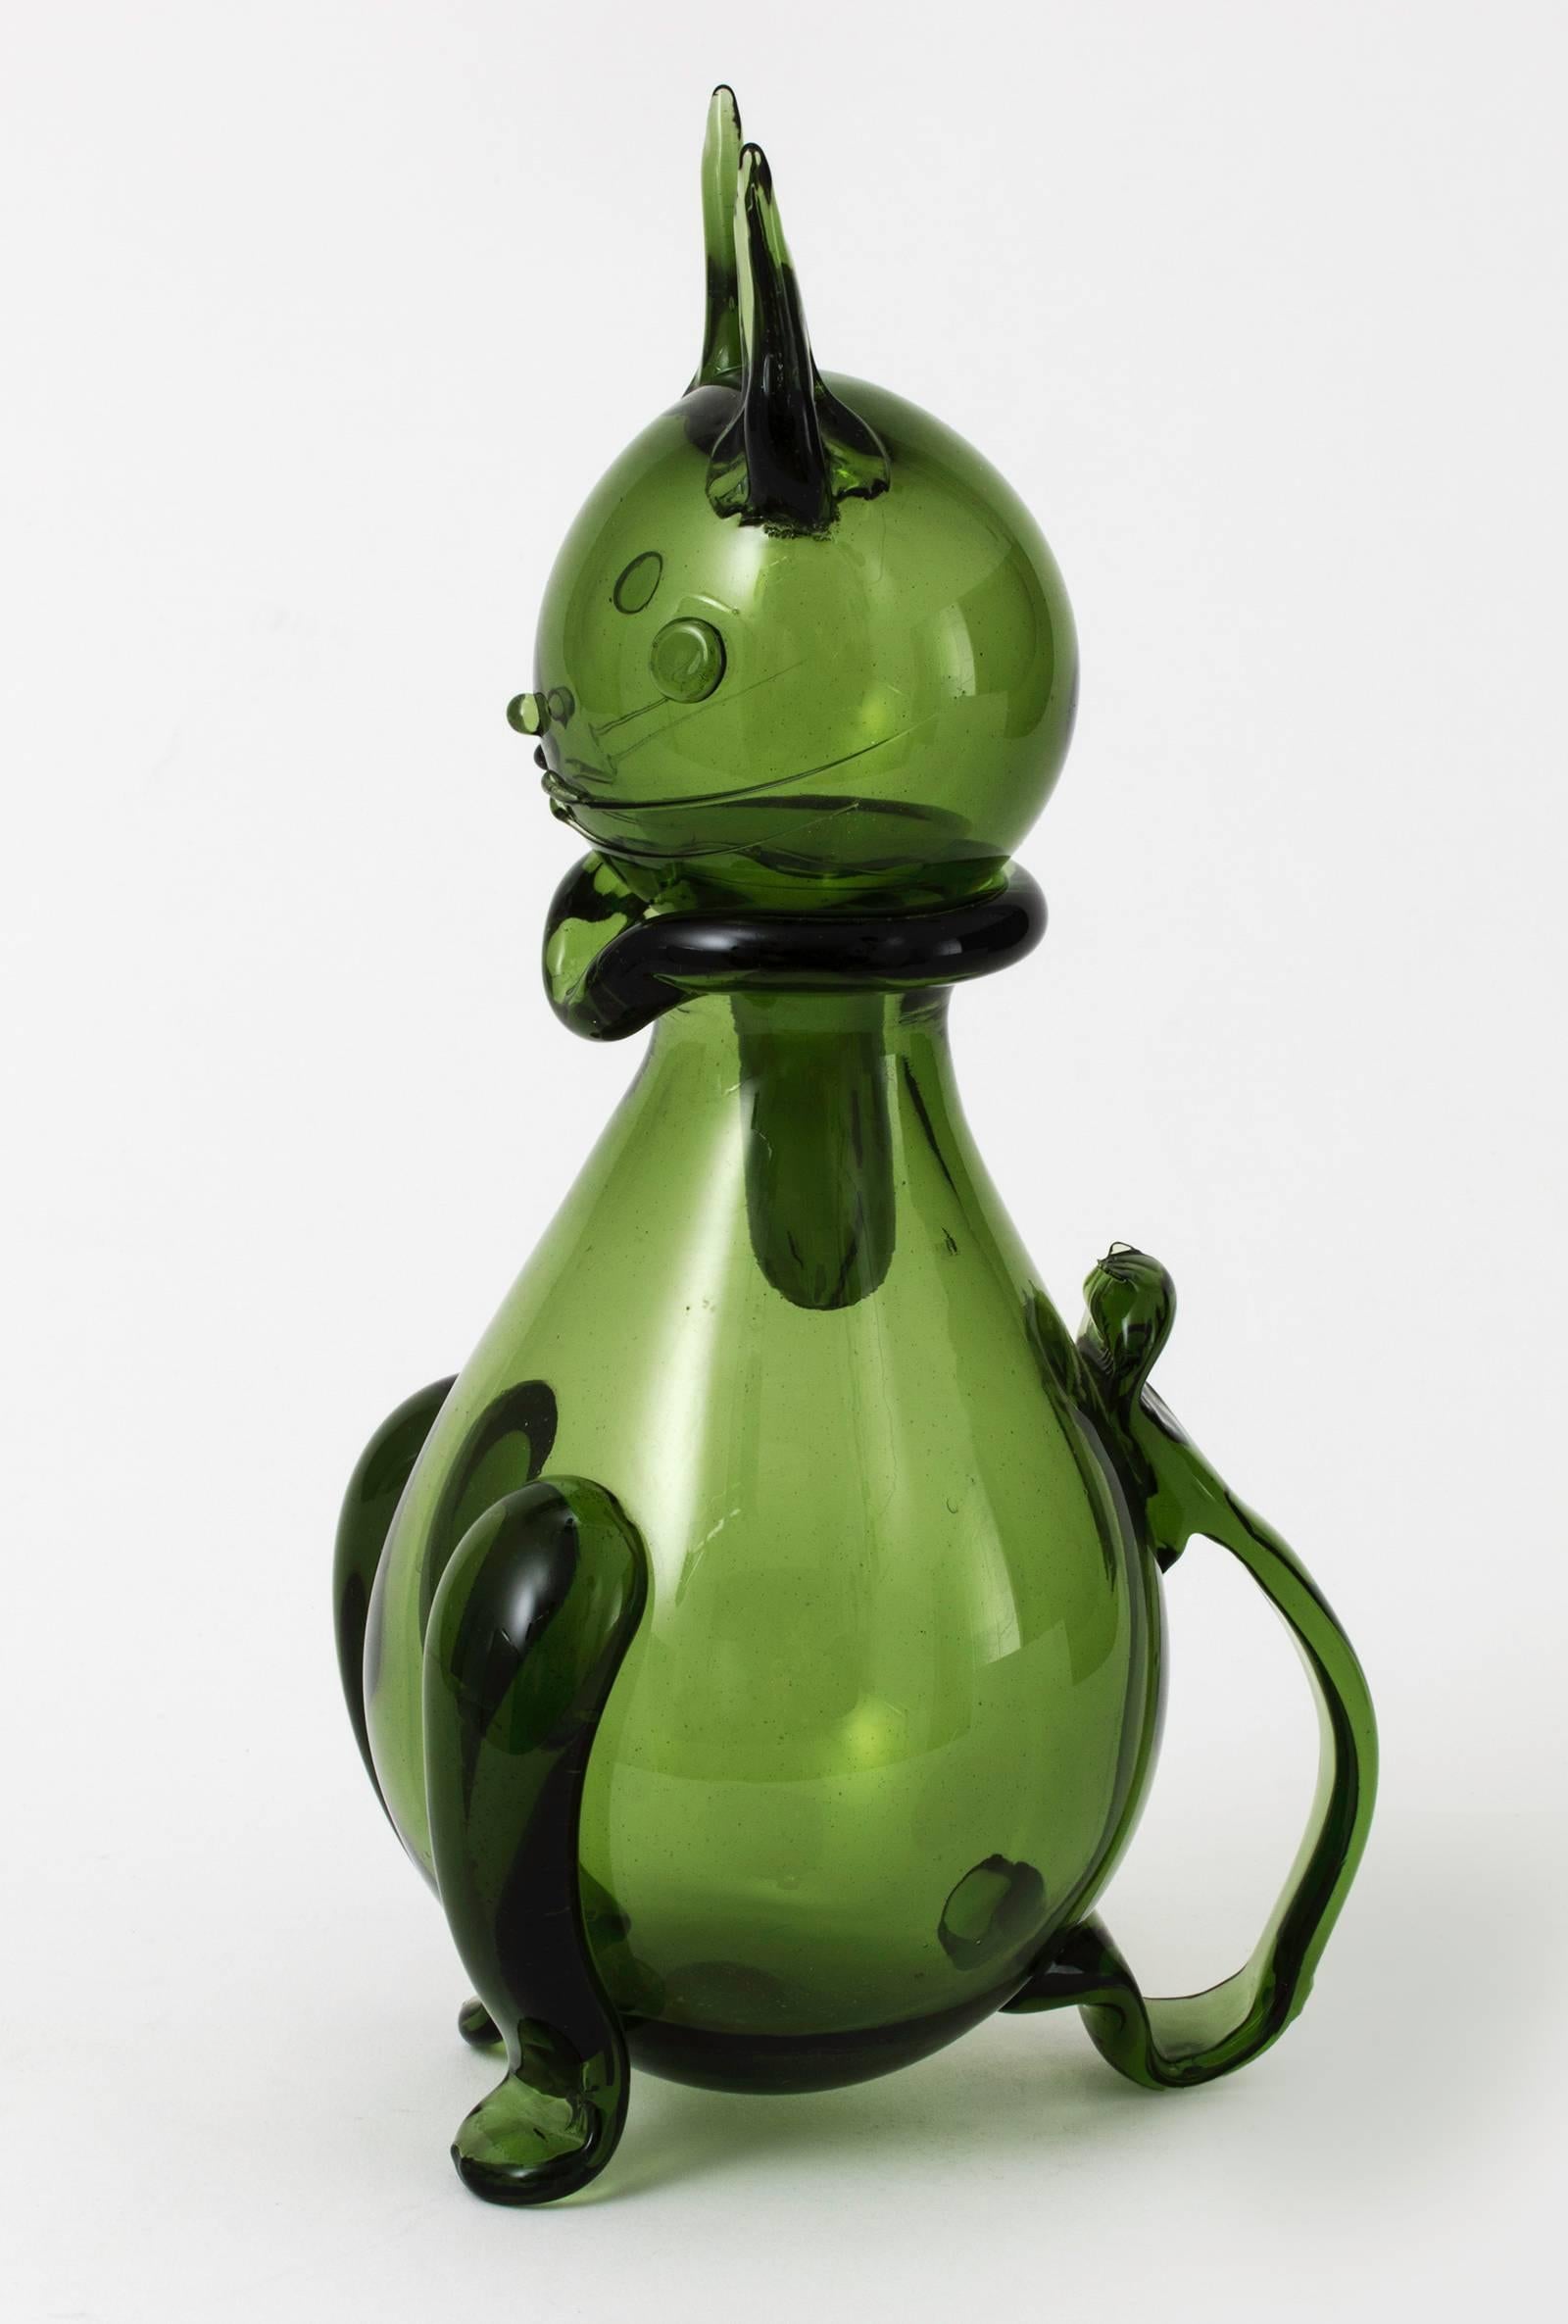 Very charming Emboli Verde handblown glass cat decanter. Beautiful green glass, whimsically stylized cat. Attributed to Gio Ponti from the 1950s.